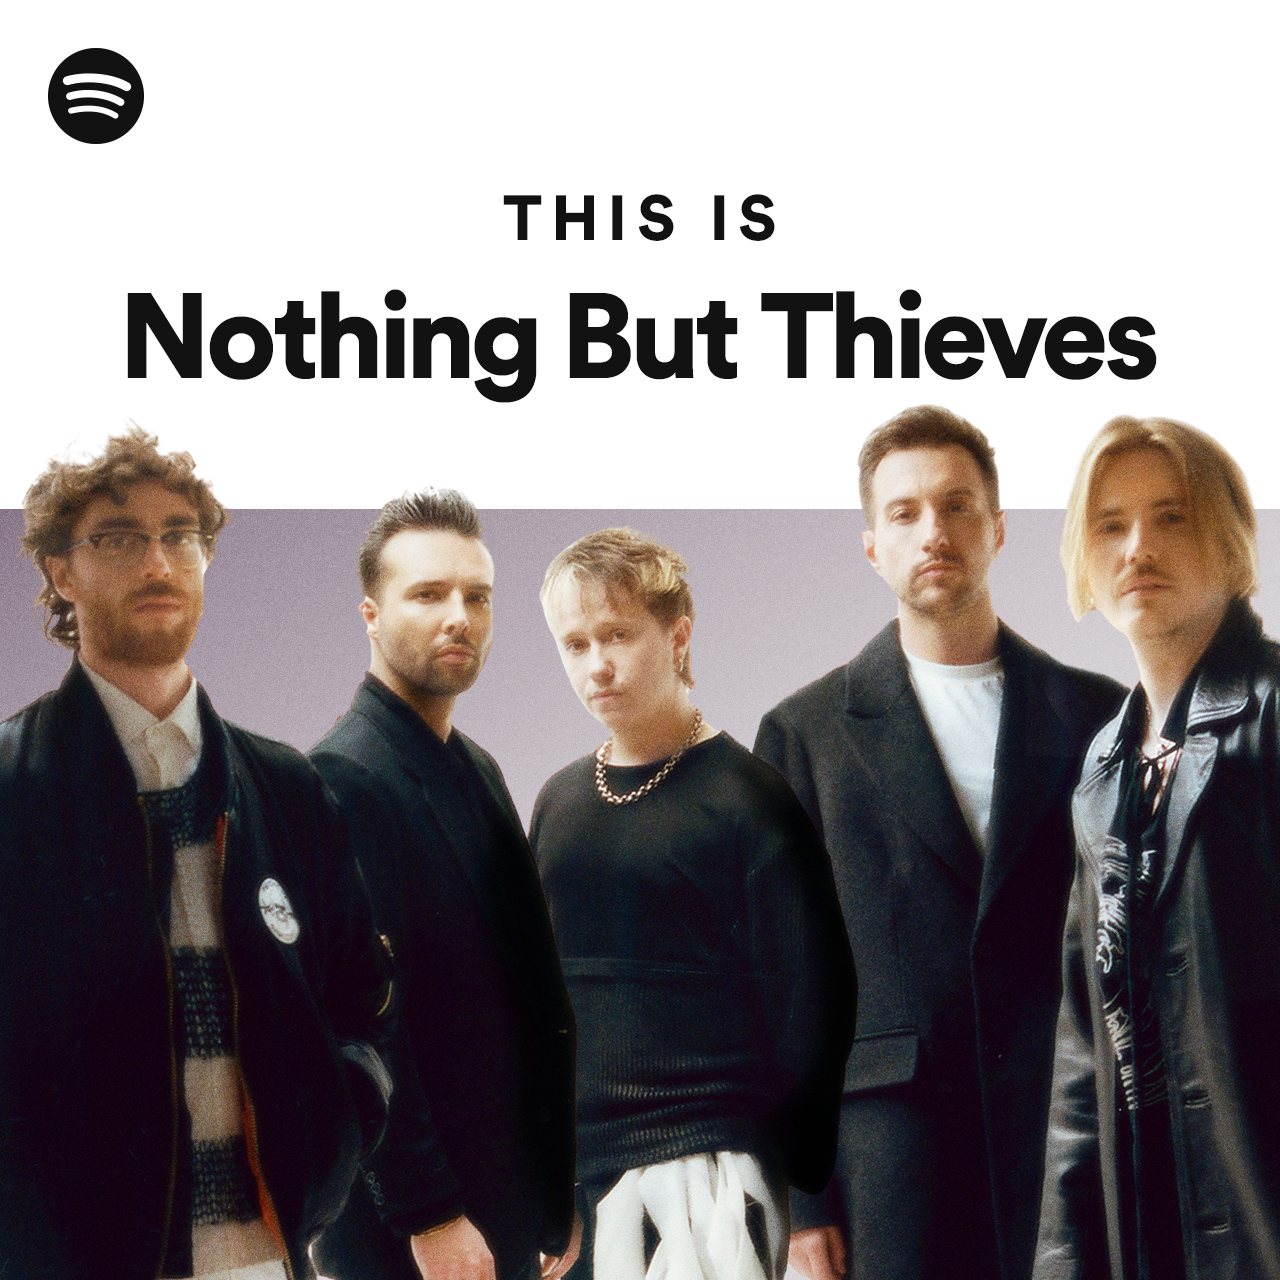 Nothing But Thieves ElkeAinsleigh